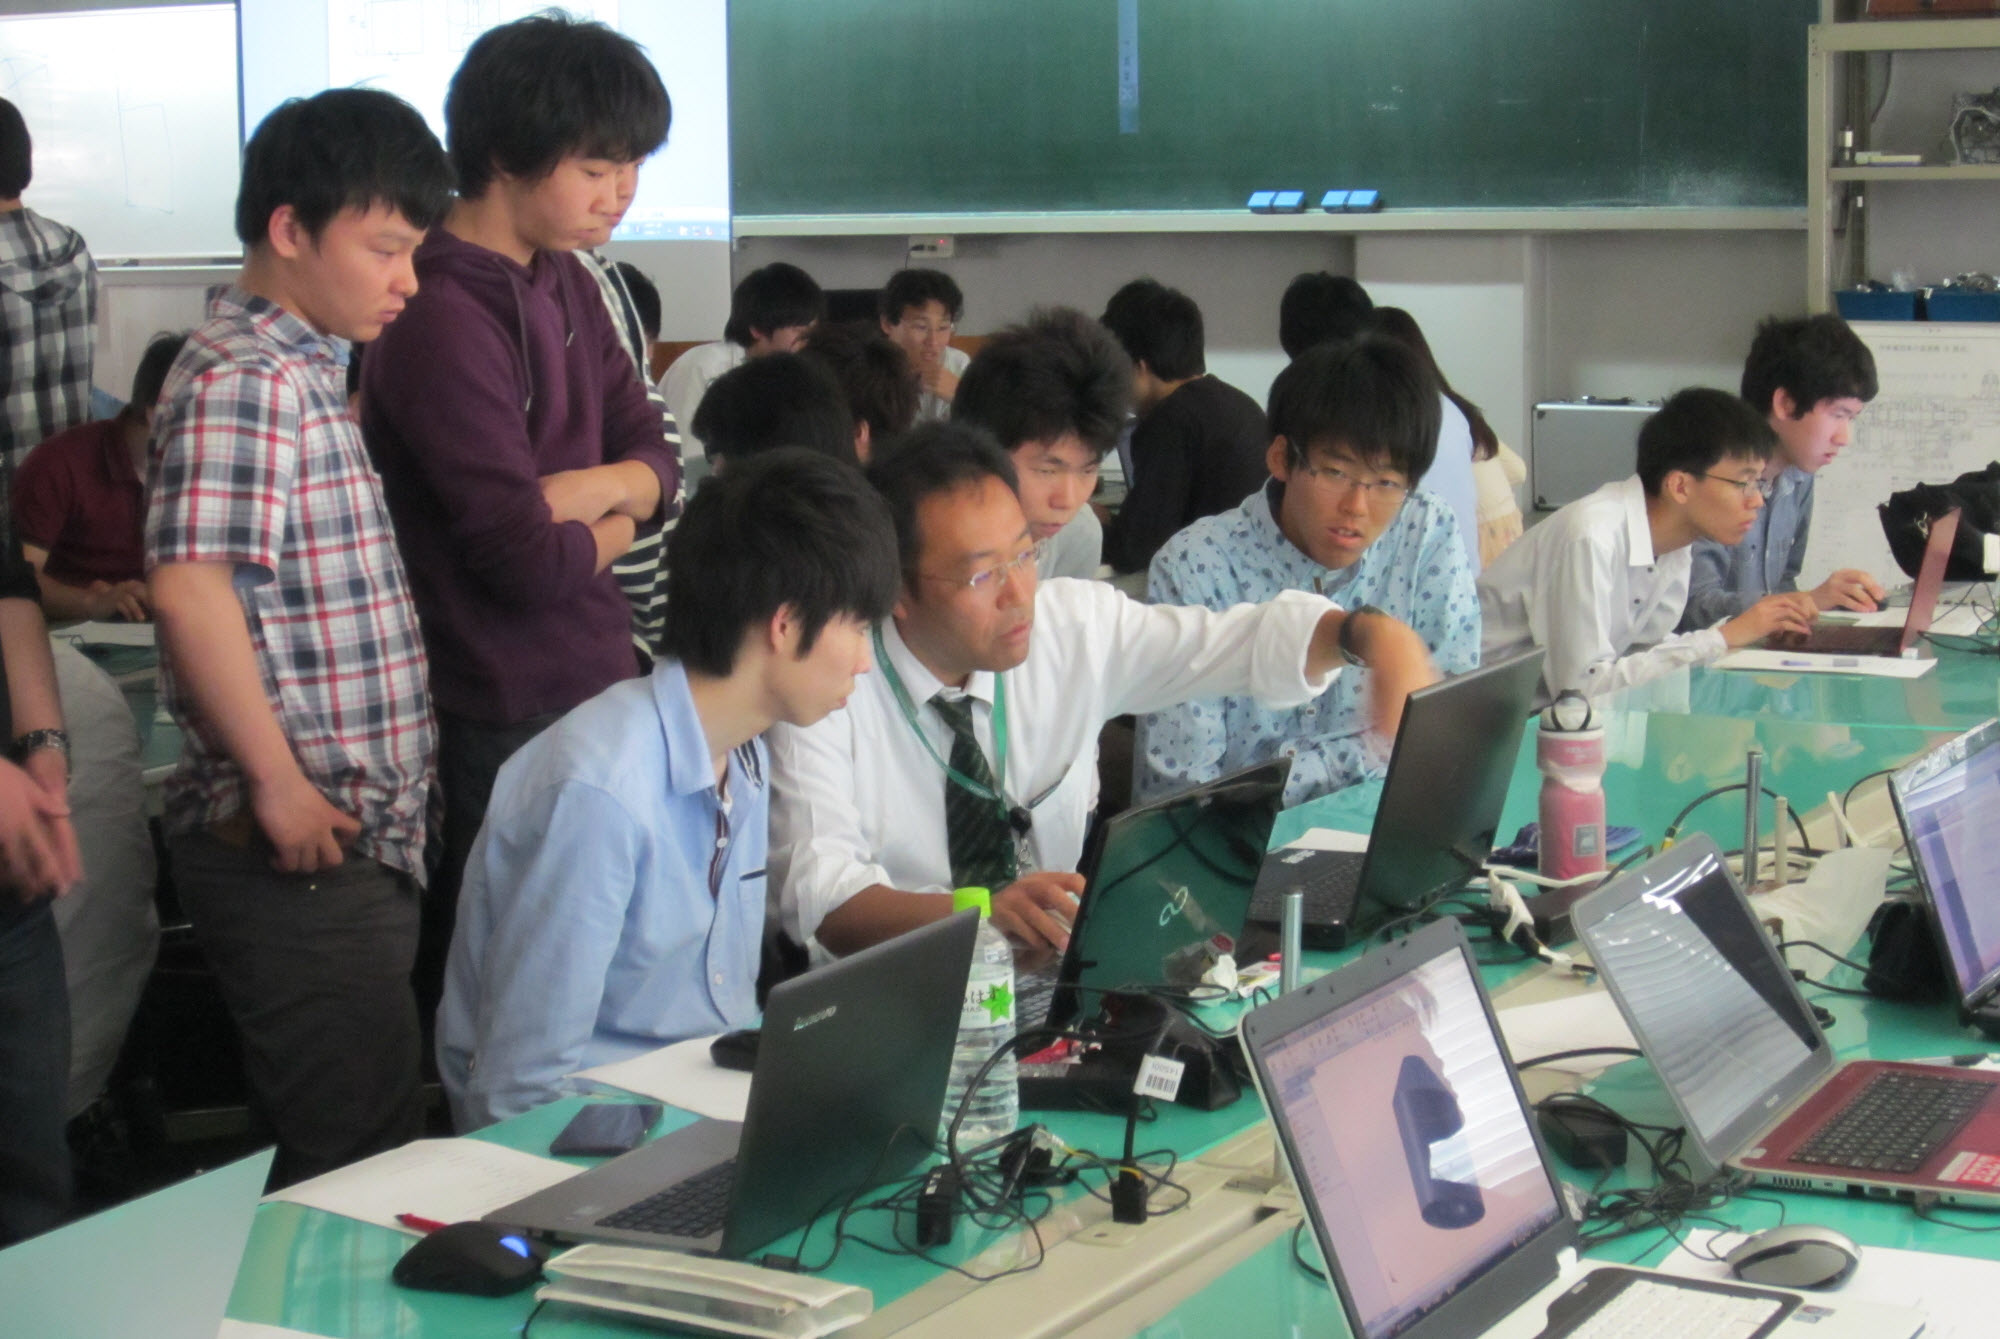 SolidWorks Japan Drives FSAE Students to Become Great Engineers